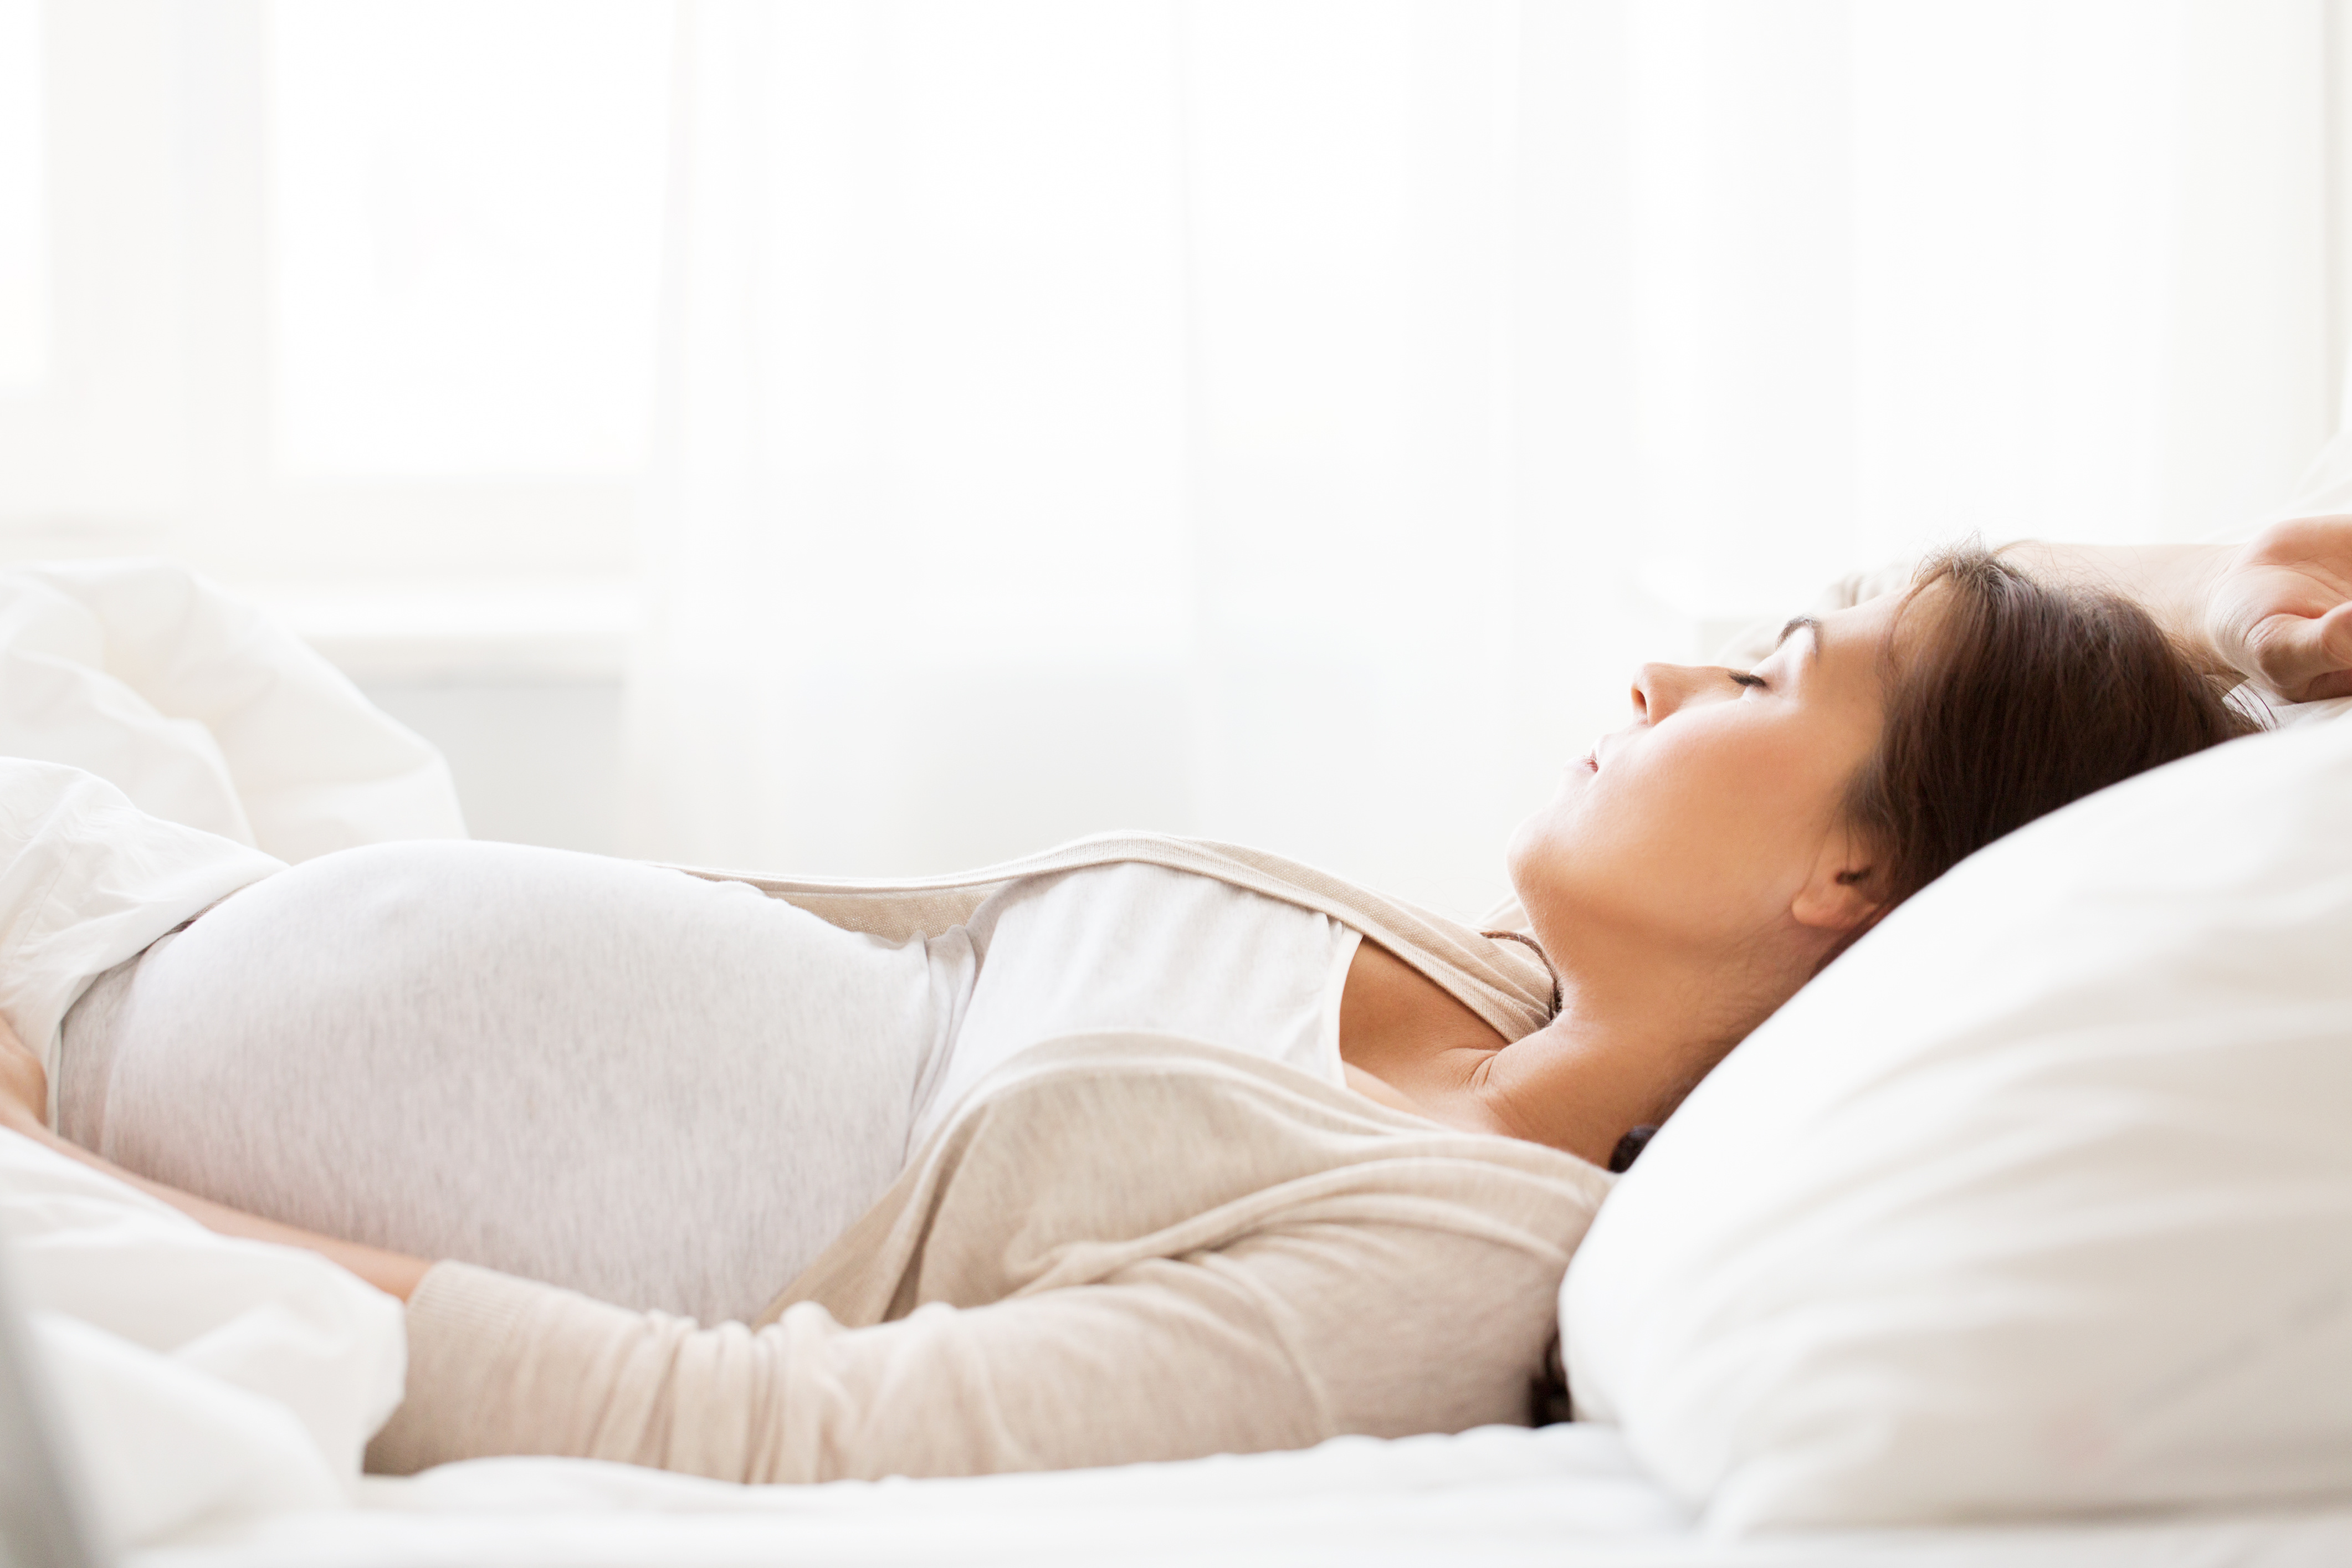 Pregnant woman wearing light colors laying down in bed sleeping